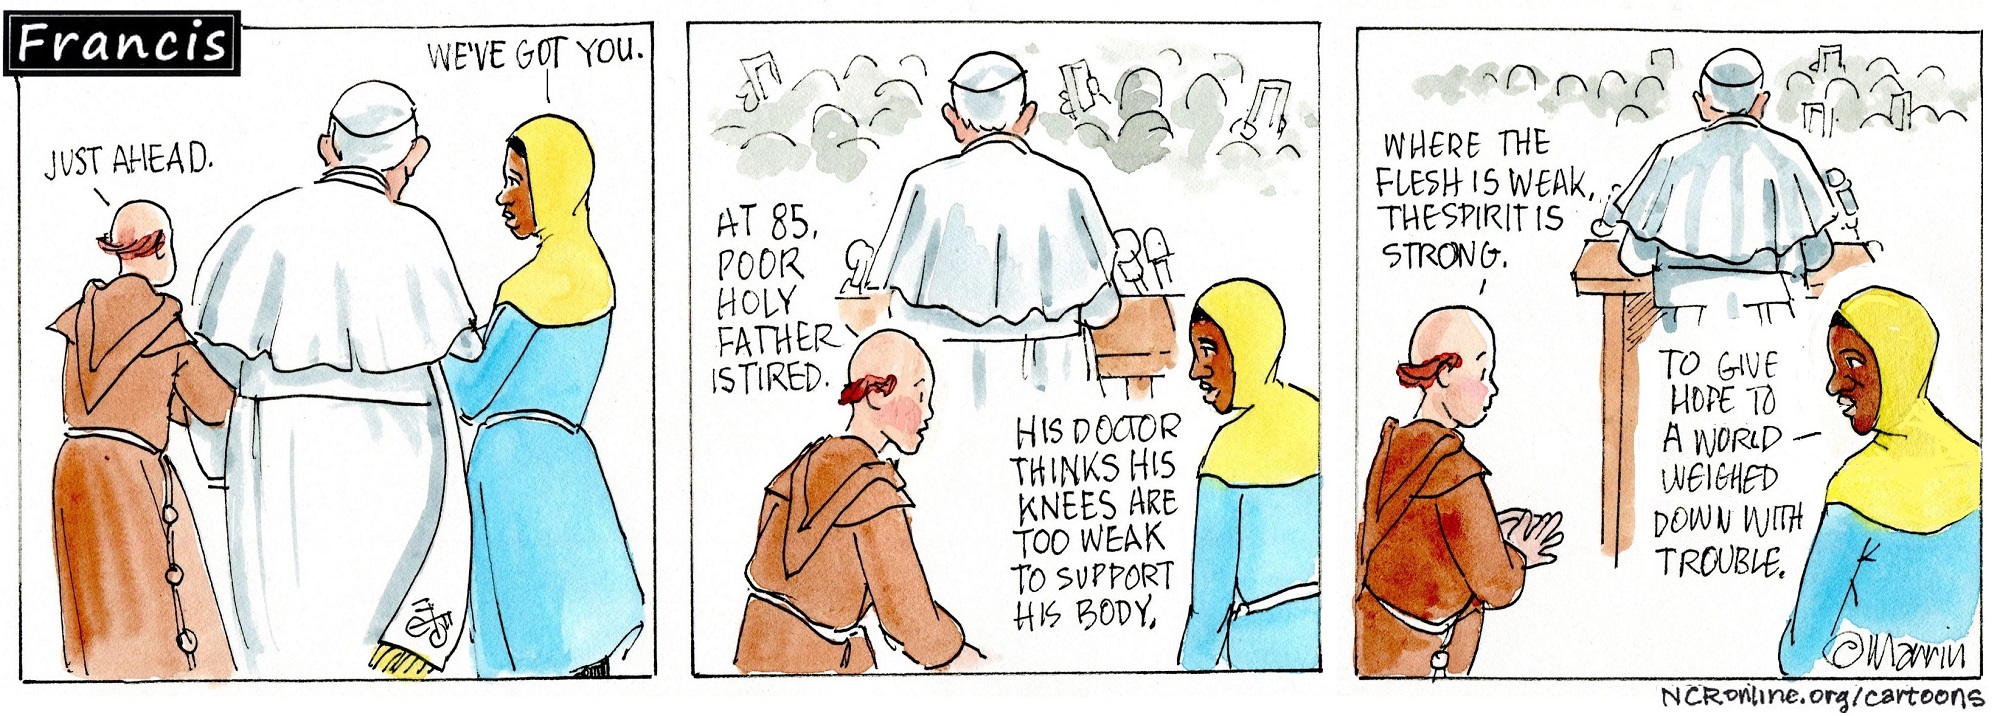 Francis, the comic strip: Francis is tired, but as Gabby says, "We've got you."